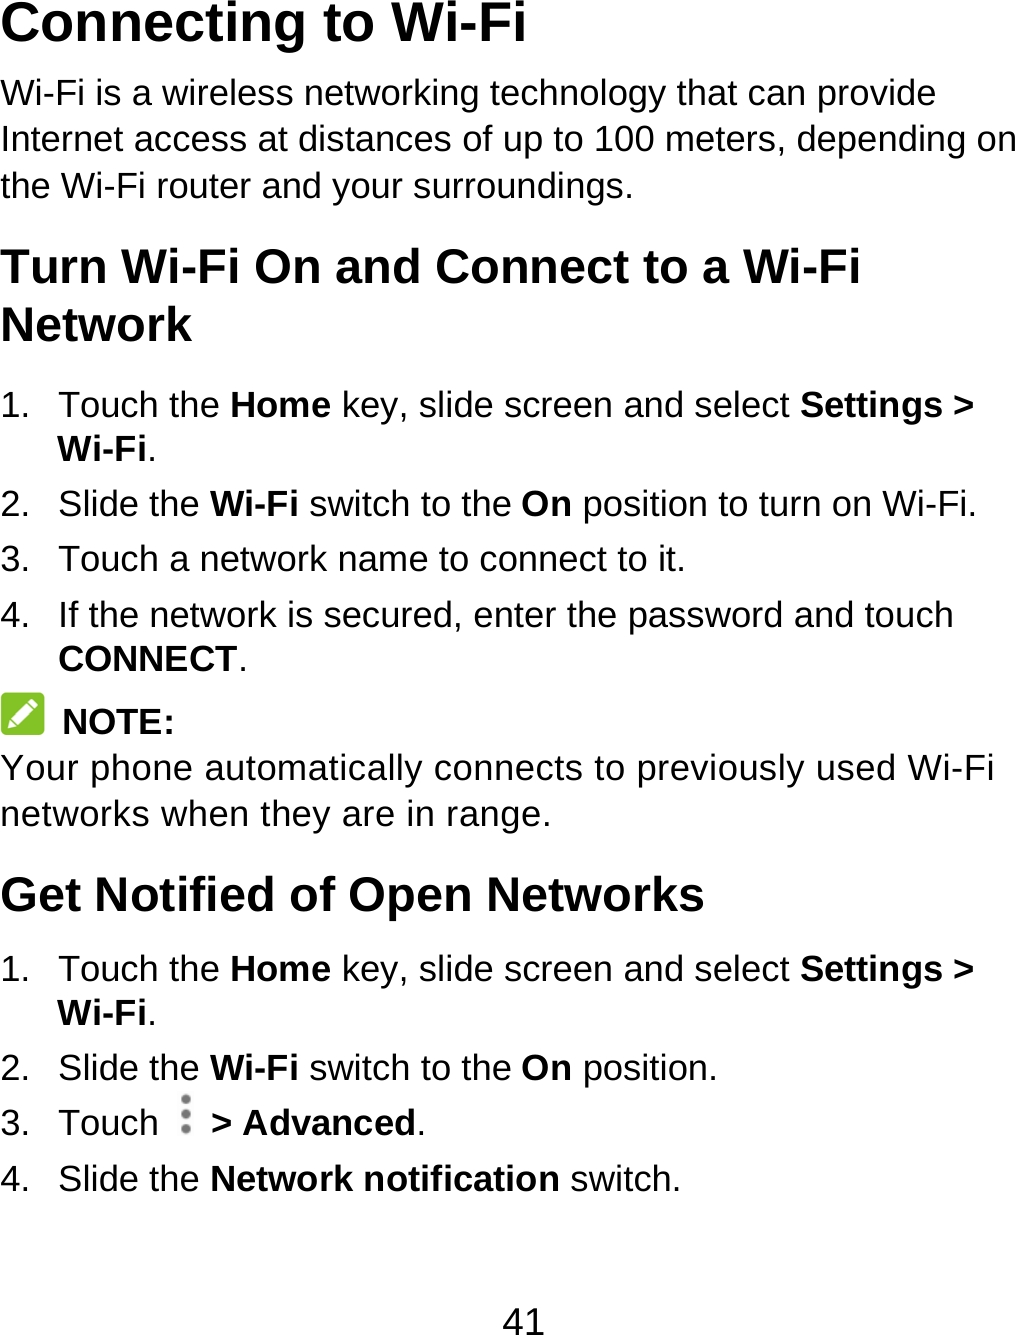 41 Connecting to Wi-Fi Wi-Fi is a wireless networking technology that can provide Internet access at distances of up to 100 meters, depending on the Wi-Fi router and your surroundings. Turn Wi-Fi On and Connect to a Wi-Fi Network 1. Touch the Home key, slide screen and select Settings &gt; Wi-Fi. 2. Slide the Wi-Fi switch to the On position to turn on Wi-Fi. 3.  Touch a network name to connect to it. 4.  If the network is secured, enter the password and touch CONNECT.  NOTE: Your phone automatically connects to previously used Wi-Fi networks when they are in range. Get Notified of Open Networks 1. Touch the Home key, slide screen and select Settings &gt; Wi-Fi. 2. Slide the Wi-Fi switch to the On position. 3. Touch   &gt; Advanced. 4. Slide the Network notification switch. 